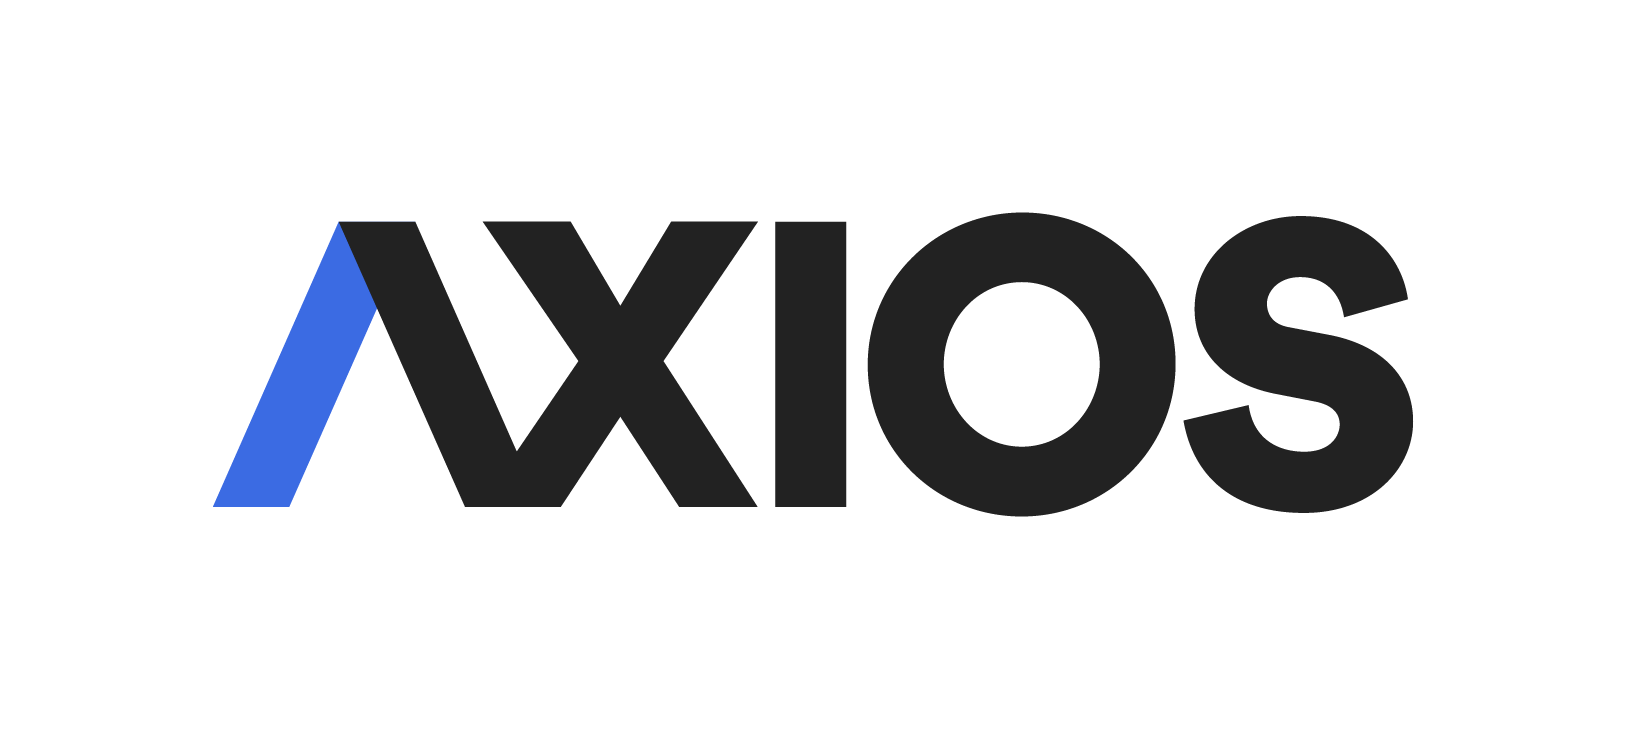 Image result for axios logo